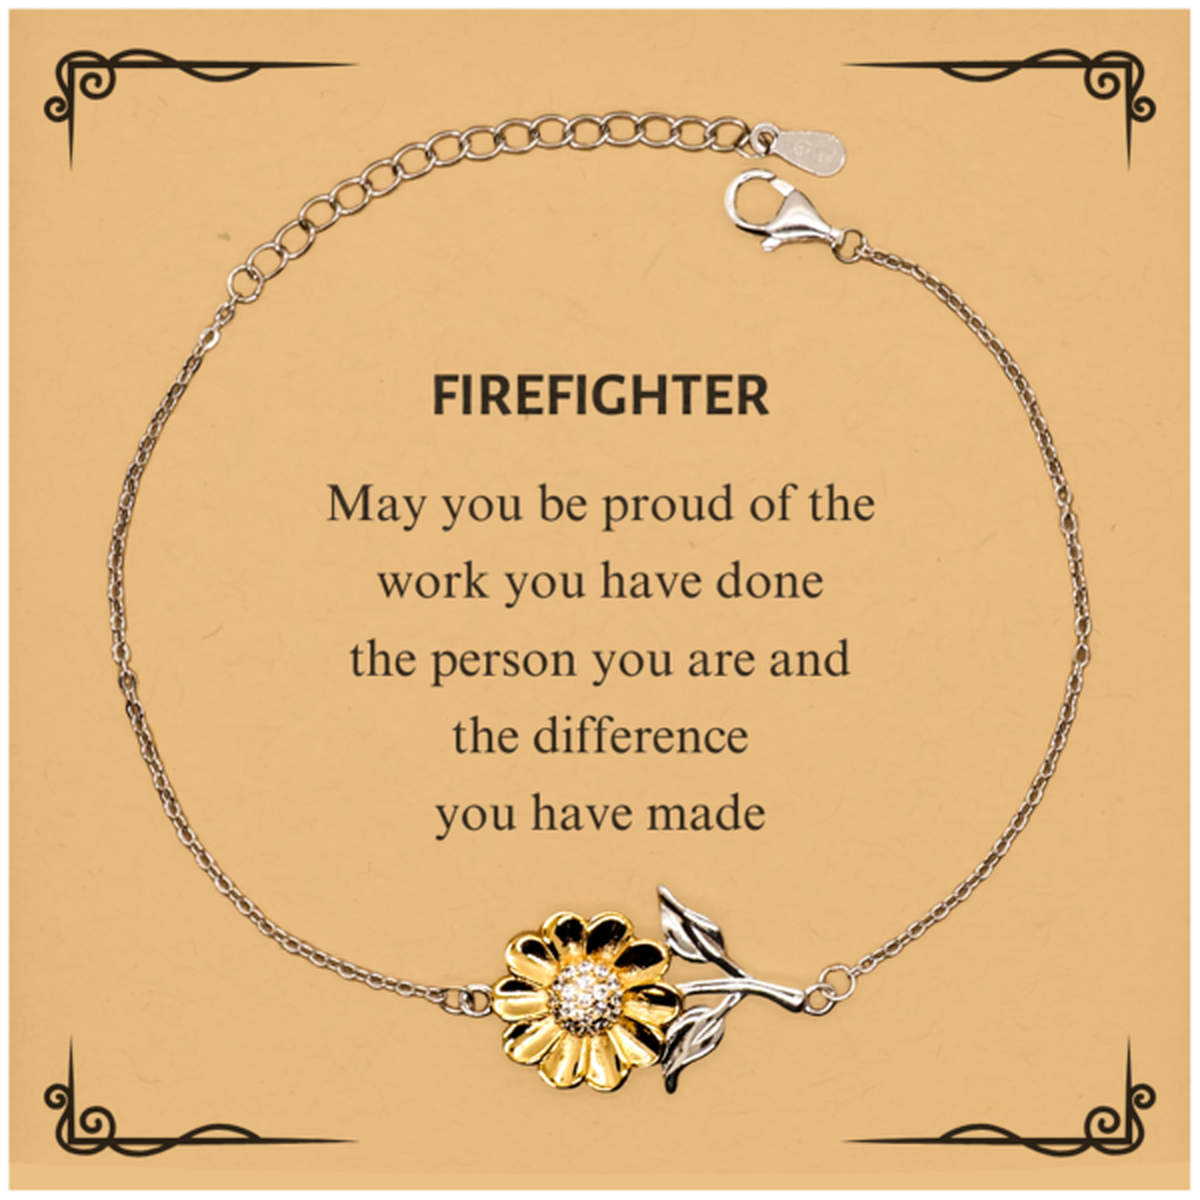 Firefighter May you be proud of the work you have done, Retirement Firefighter Sunflower Bracelet for Colleague Appreciation Gifts Amazing for Firefighter